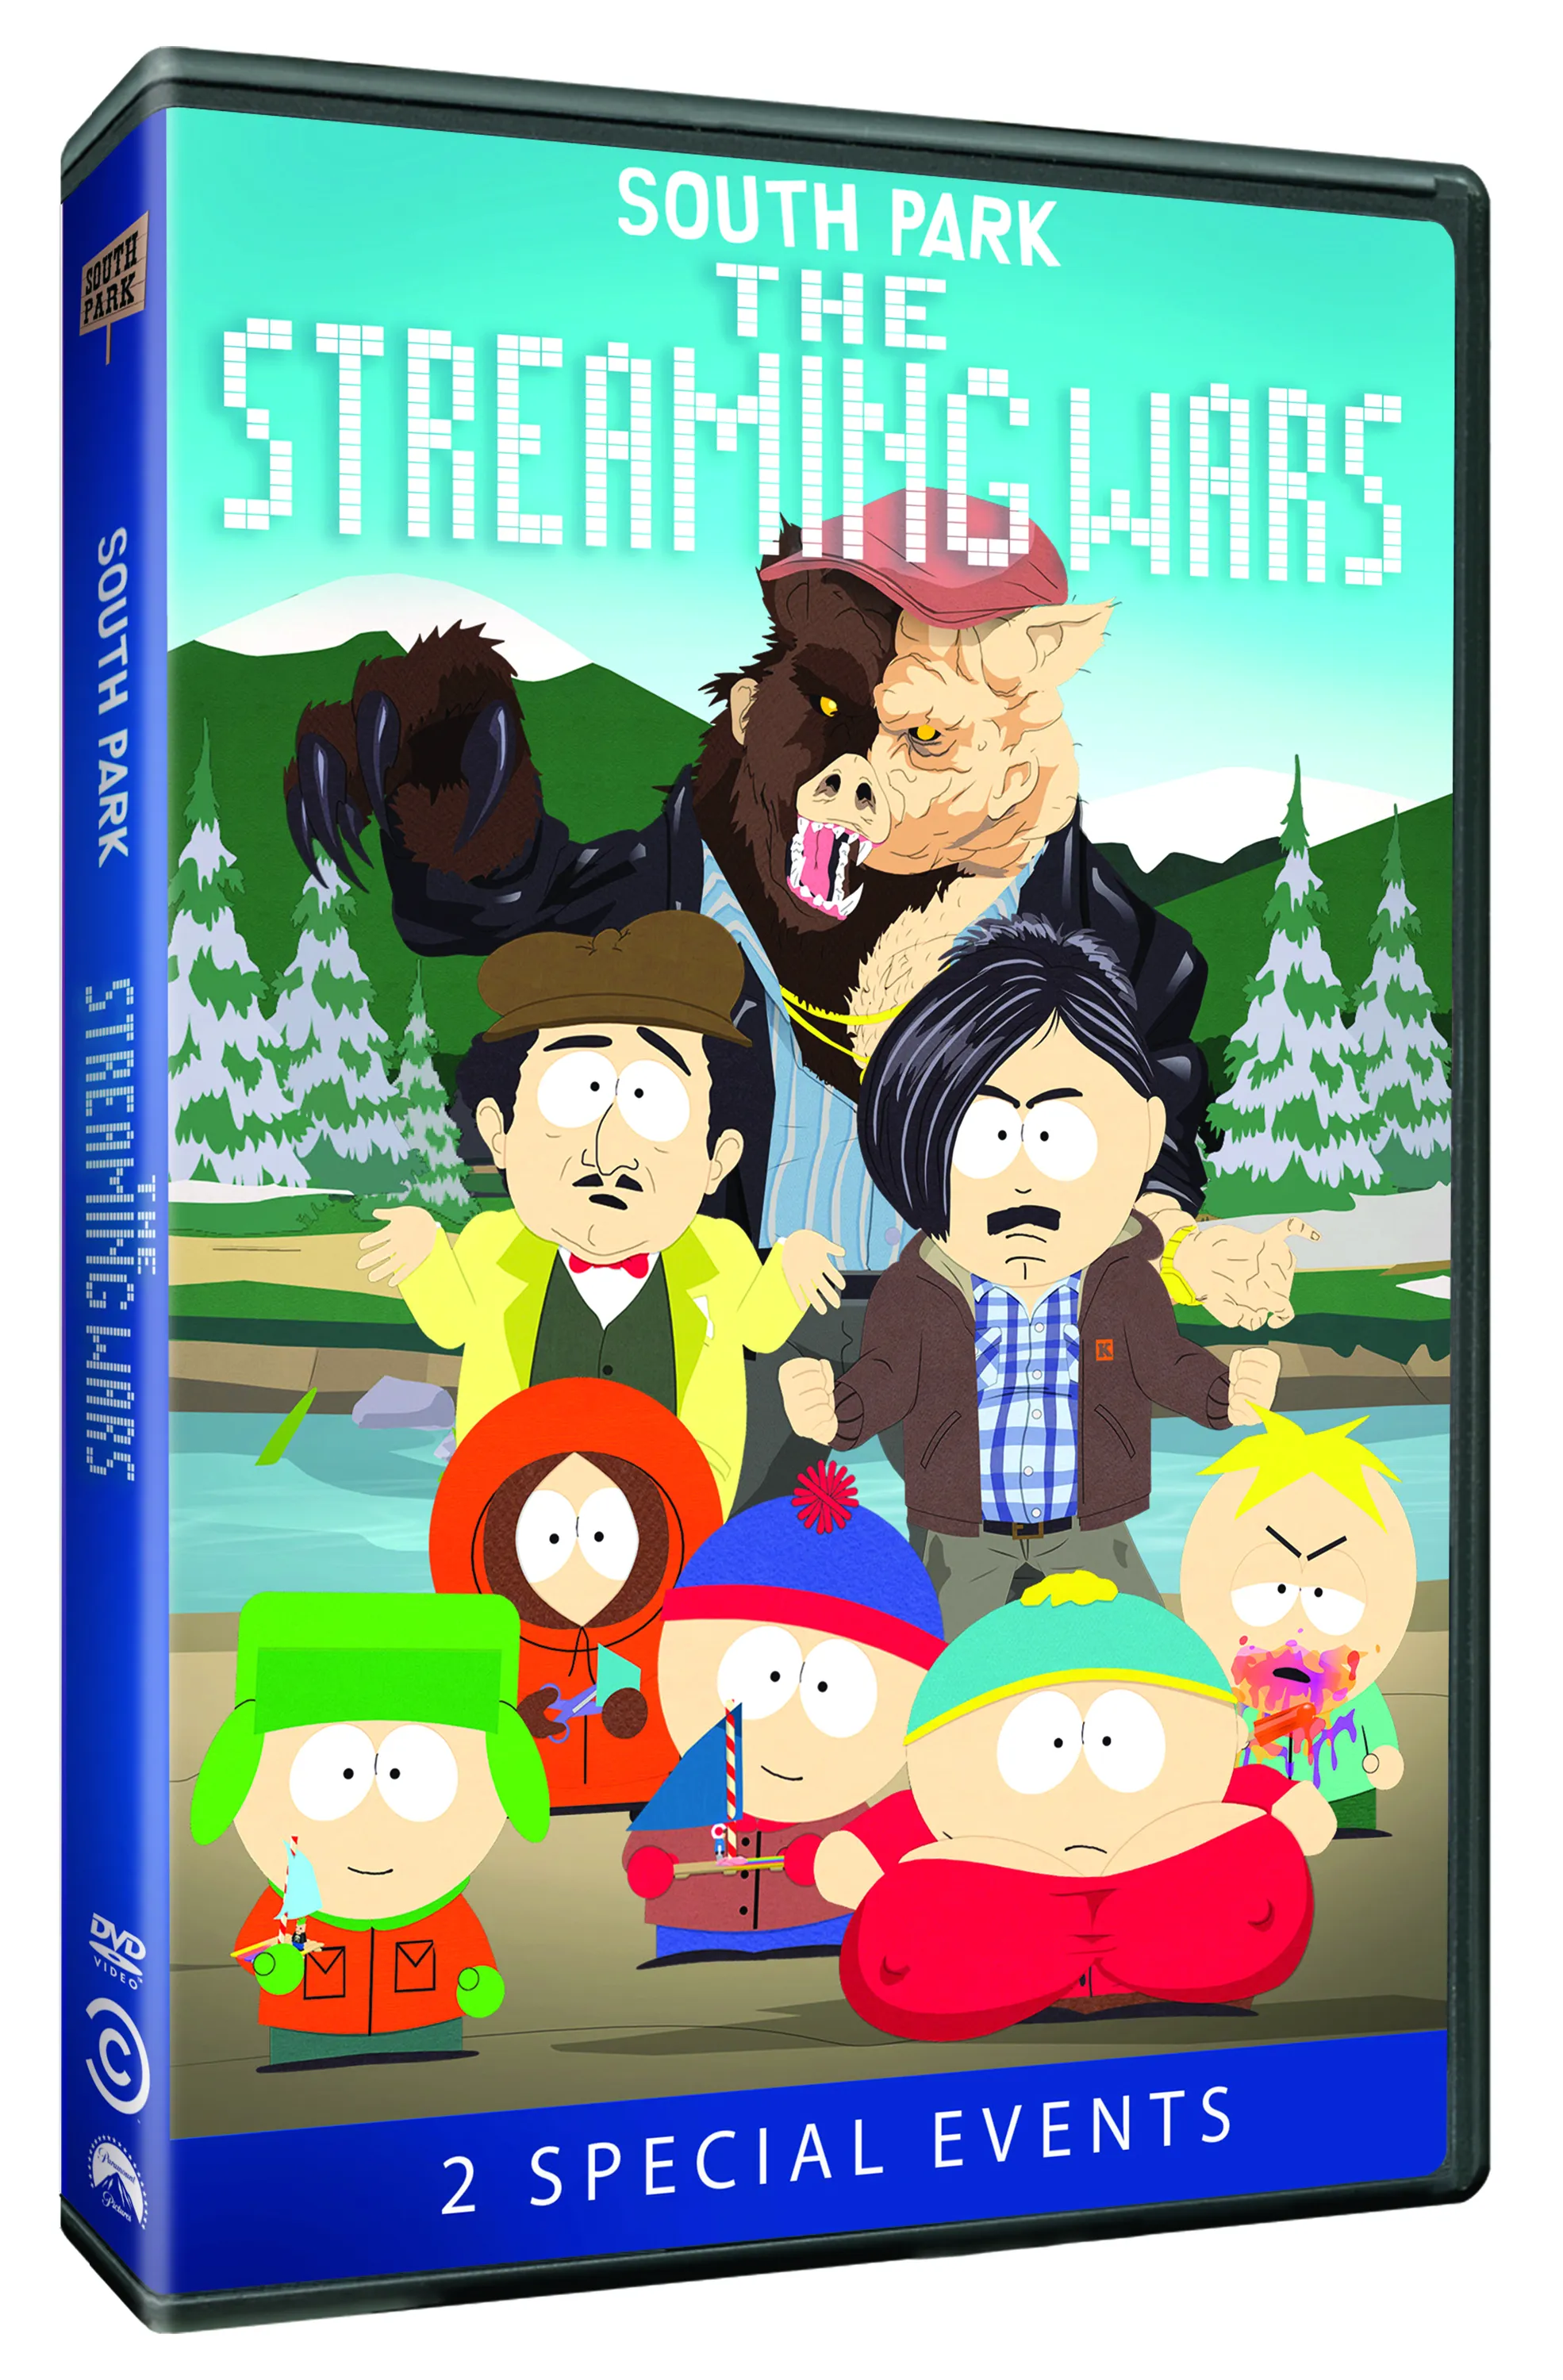 South Park: The Streaming Wars Blu-ray & DVD Release Date